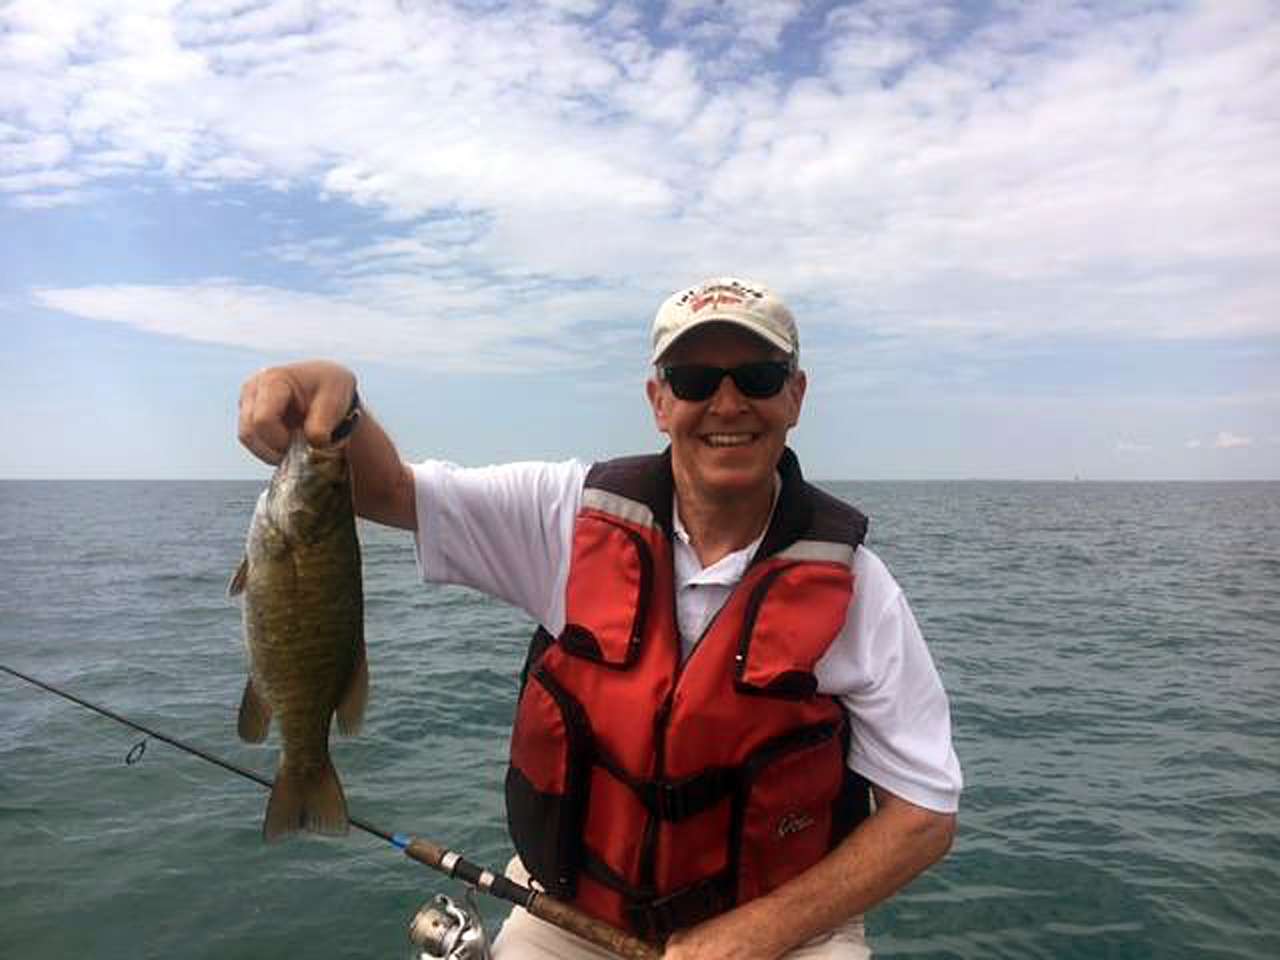 State Rep. Tim Kelly shows off a Lake St. Clair smallmouth bass caught while fishing with boater Dave Reault.